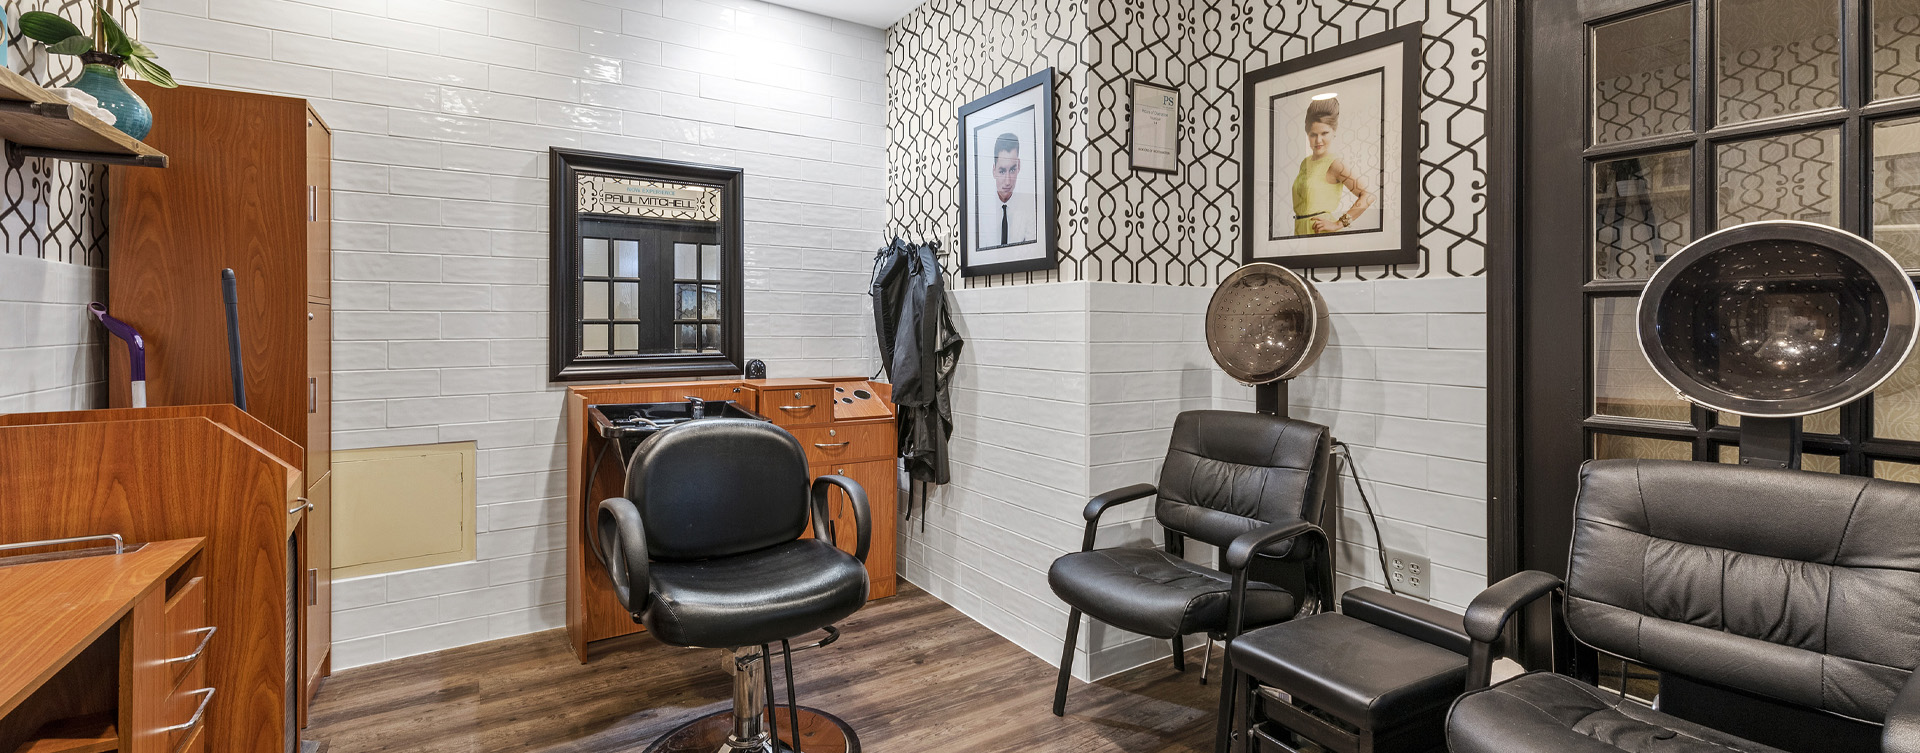 Strut on in and find out what the buzz is all about in the salon at Bickford of Worthington